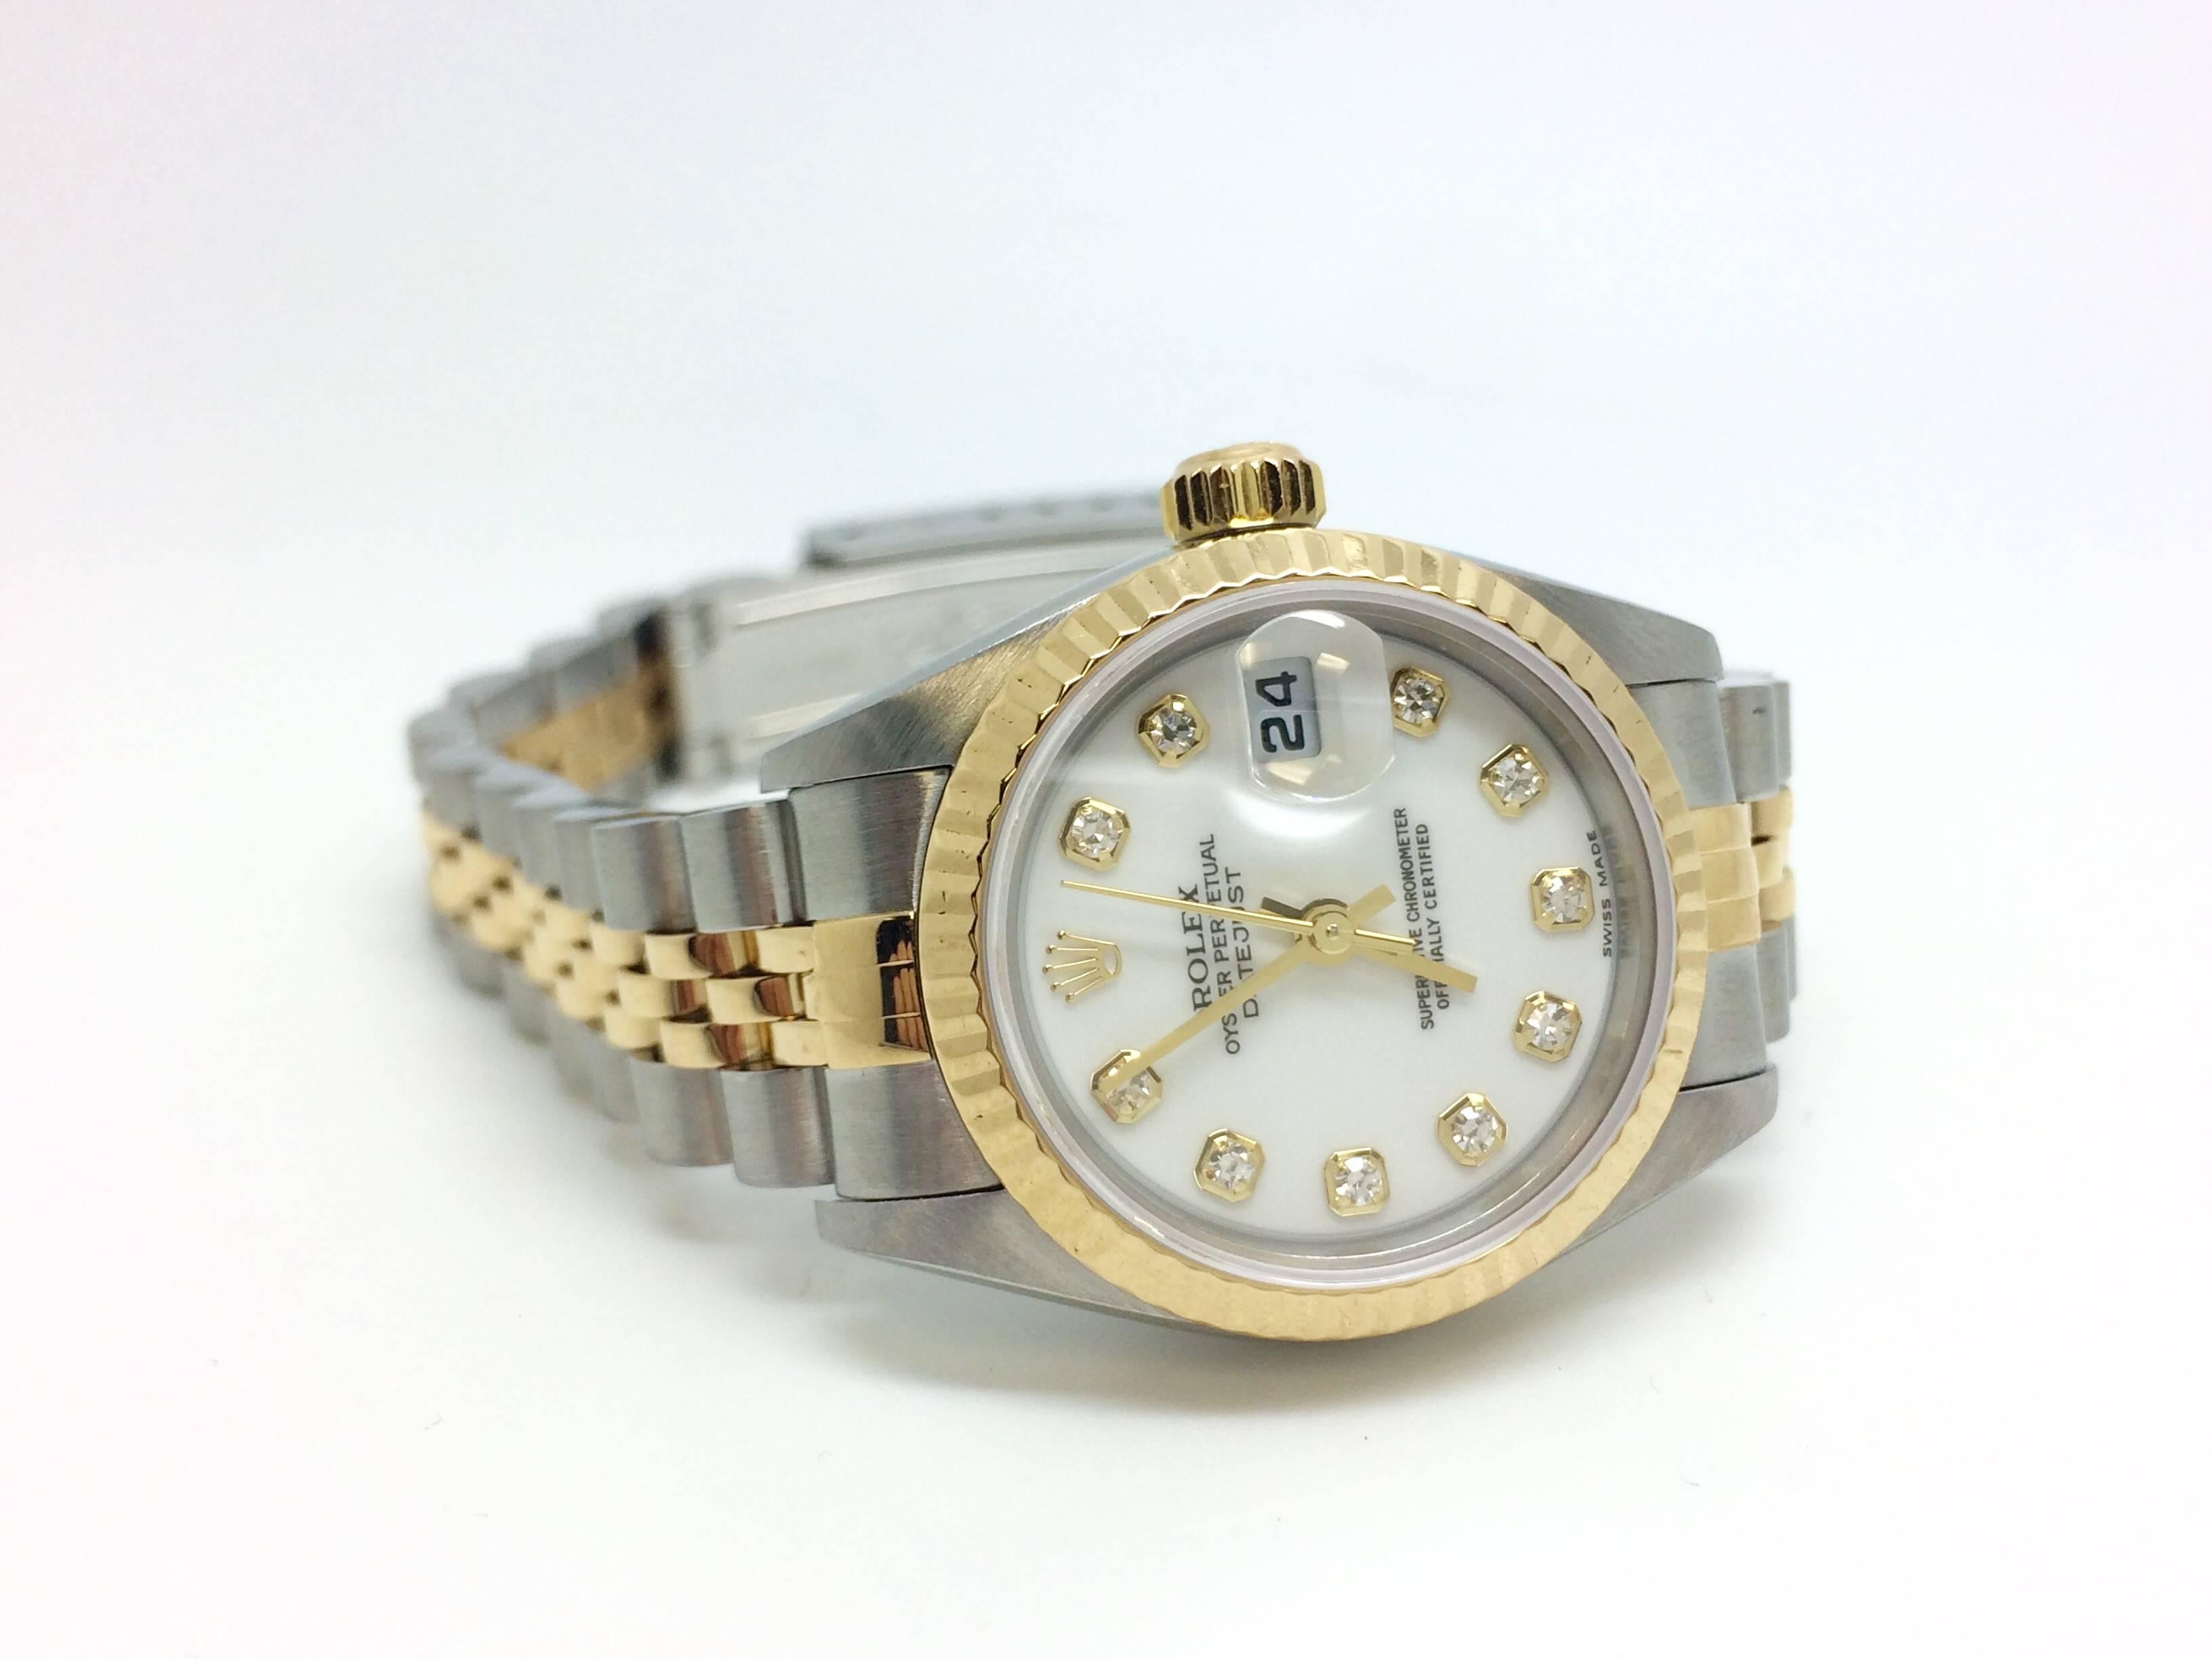 Rolex Lady's two tone Datejust Ref # 79173 pre-owned 26mm timepiece.  The dial is white with diamond markers and a classic fluted bezel.  The case is steel with 18 kt yellow gold and steel jubilee bracelet, inside wrist measurement approximately 7.5